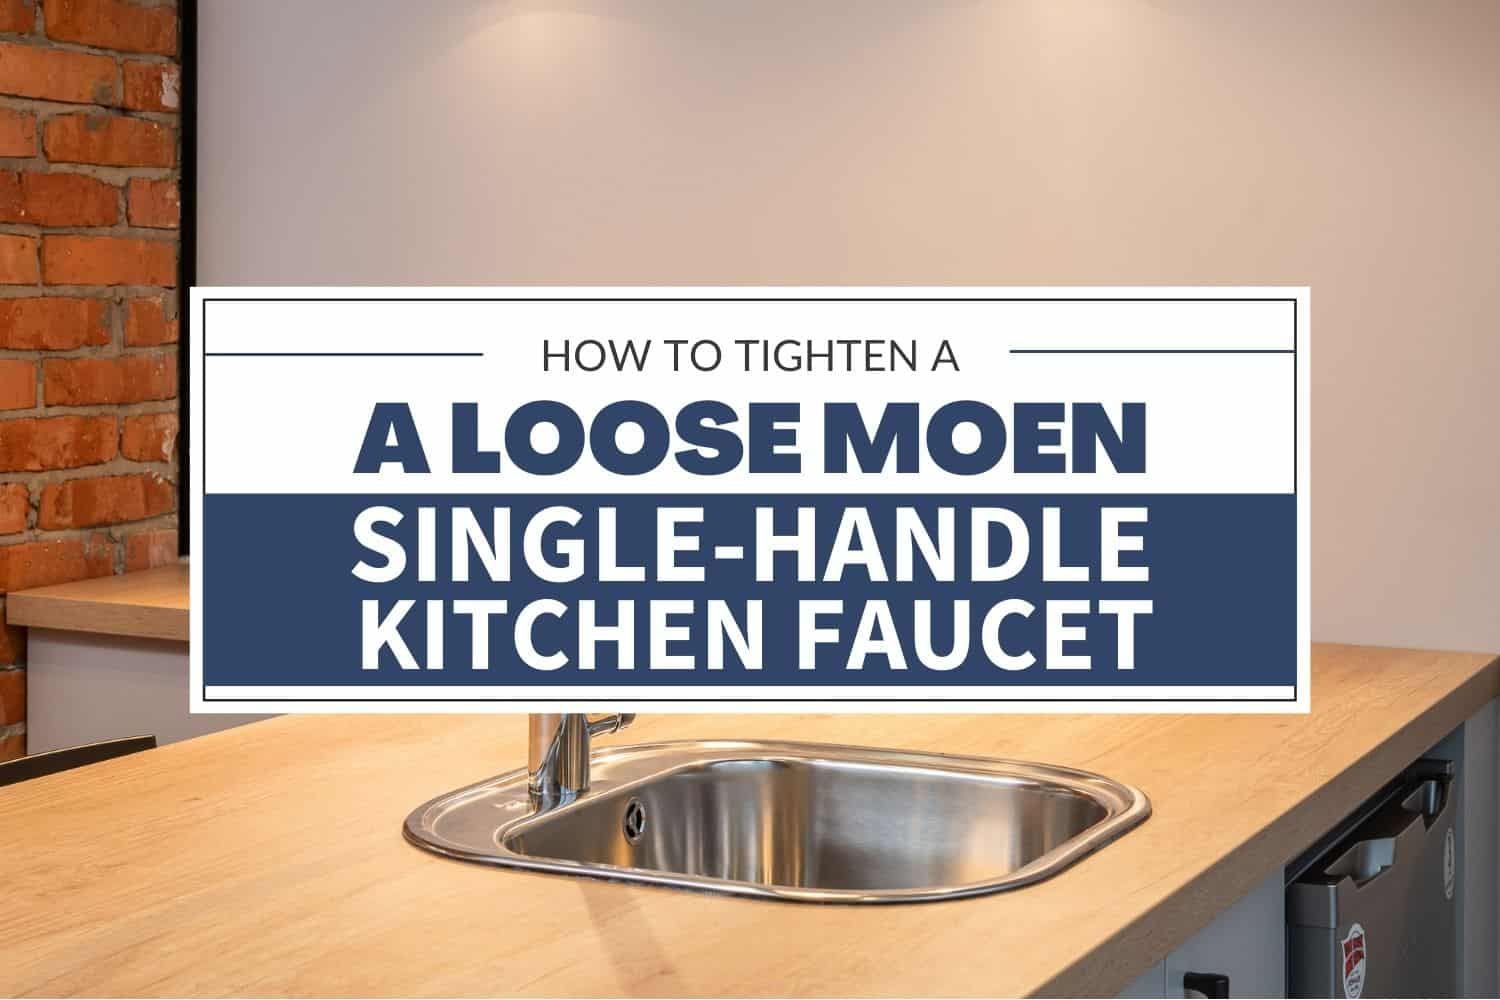 how to tighten a loose moen single handle kitchen faucet